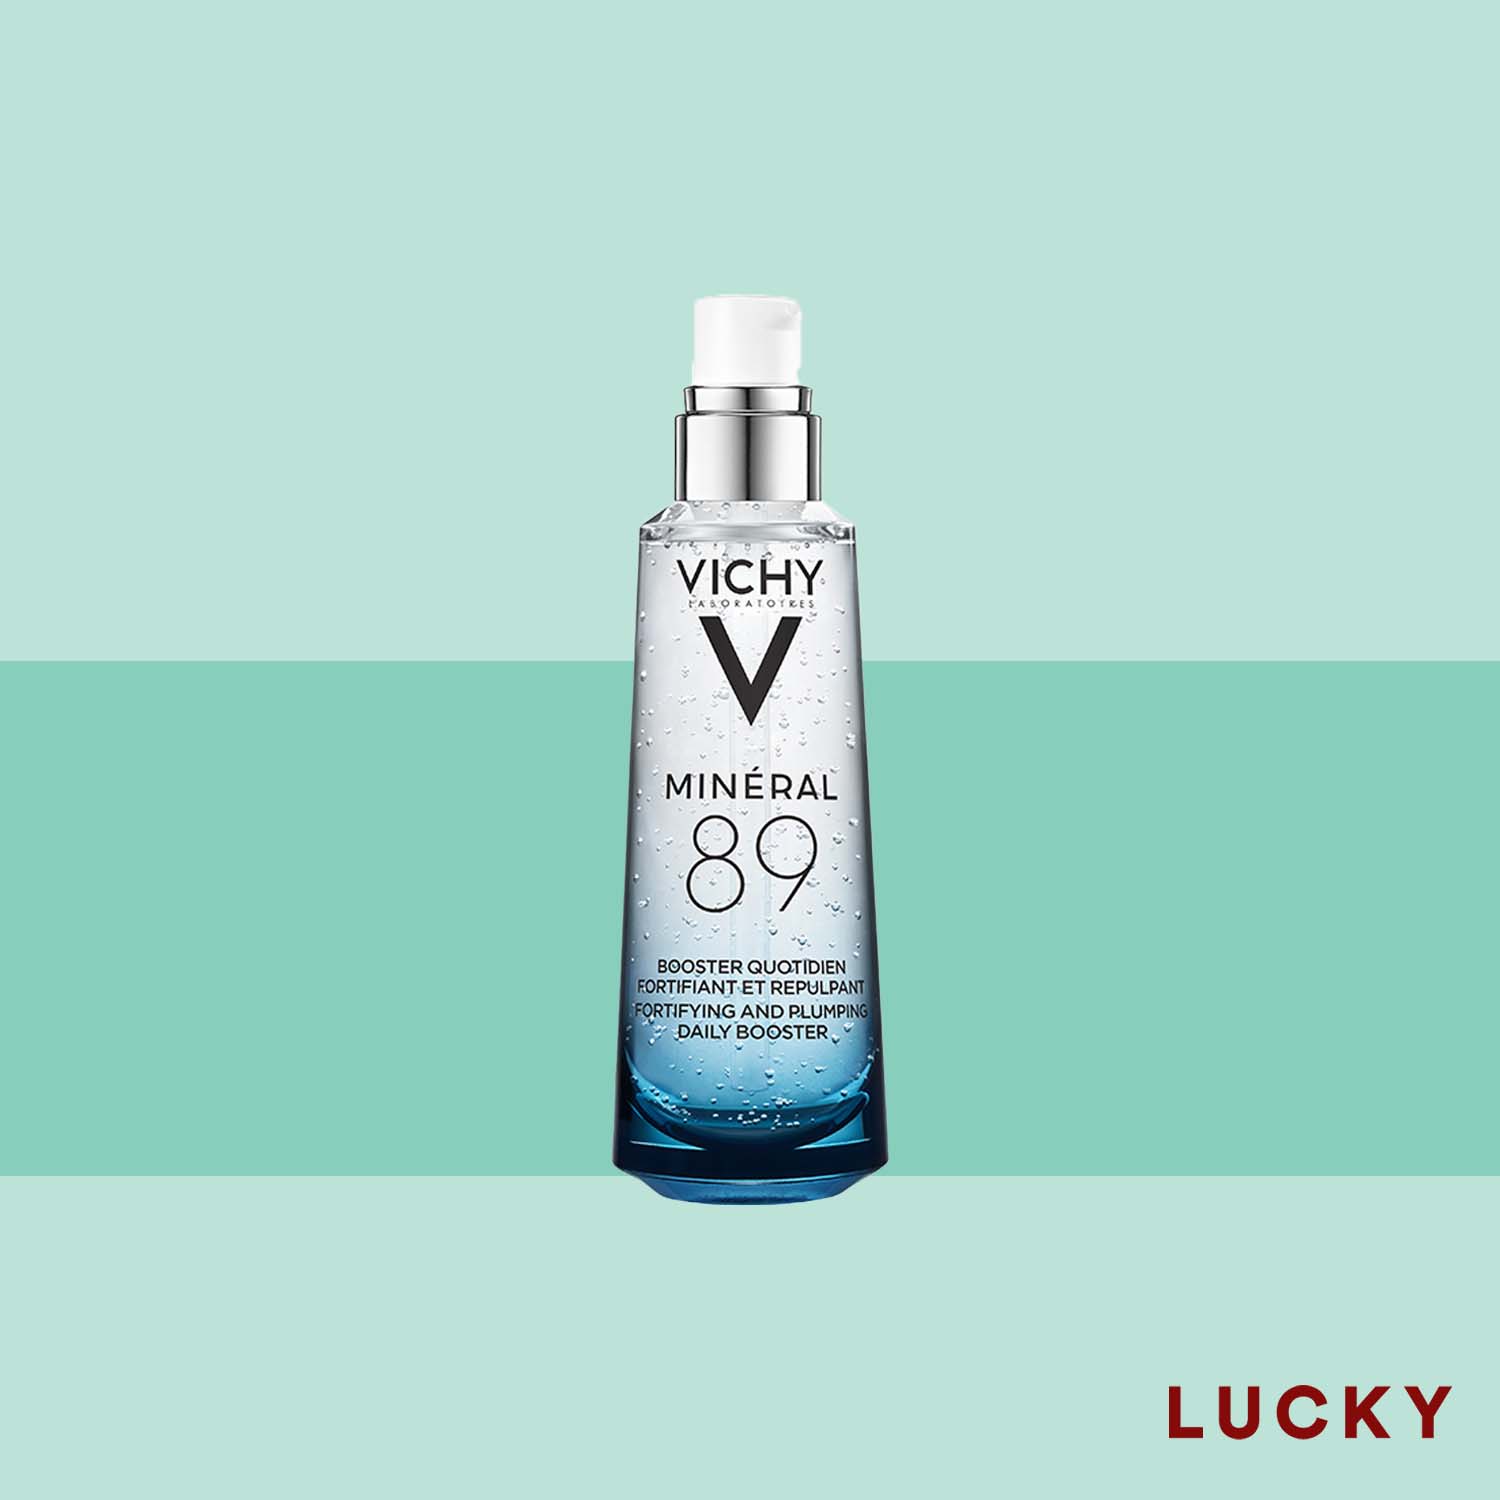 Vichy Minéral 89 Face Serum with Hyaluronic Acid